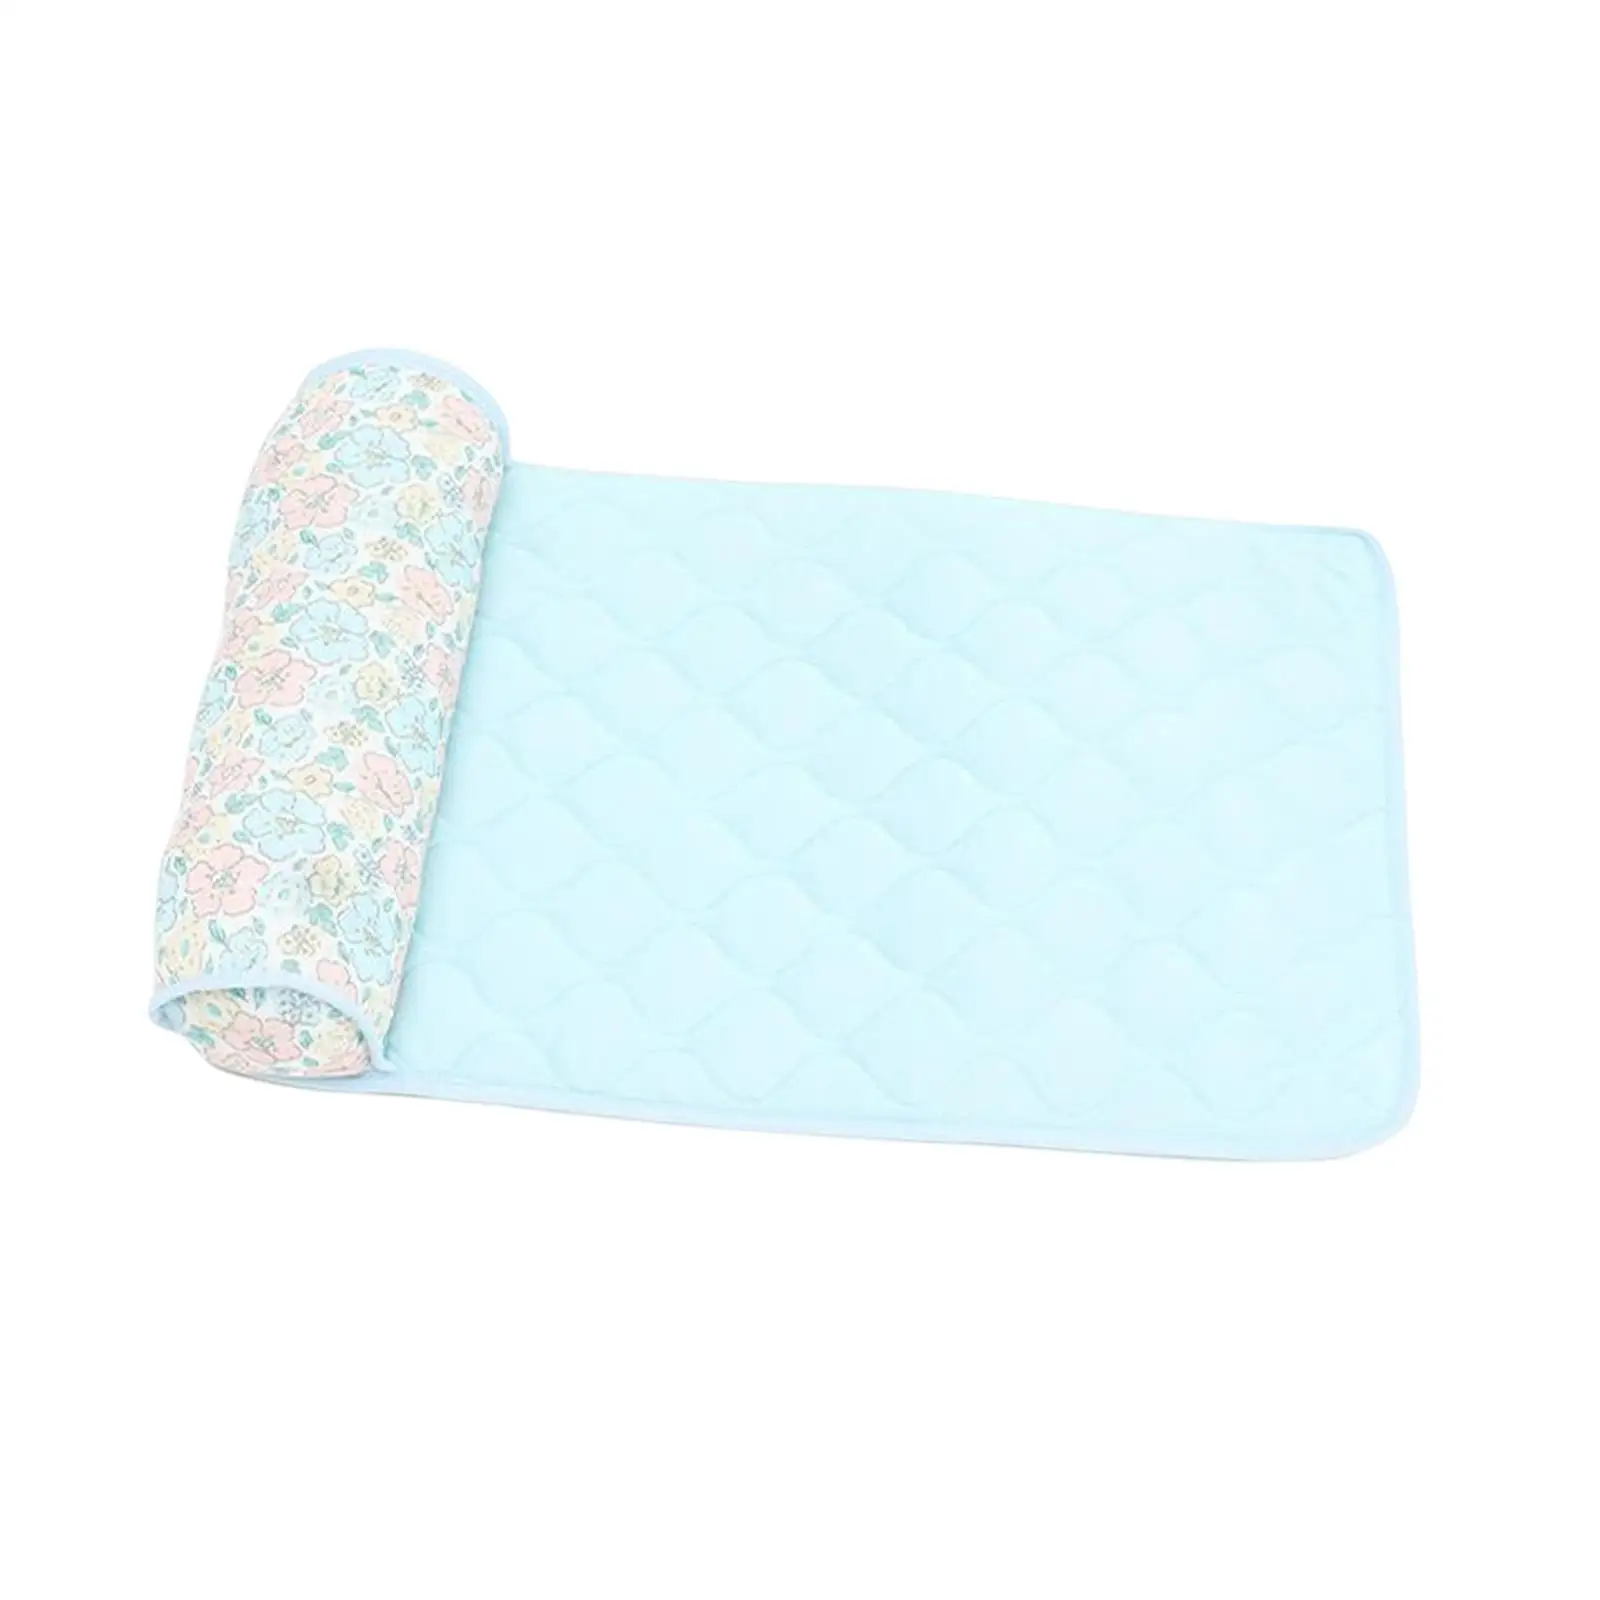 Dog Cooling Mat Cooling Dog Mat Summer Cats Bed Portable Puppy Sleep Cushion Bed Dog Cooling Pad Cat Cooling Blanket for Outdoor